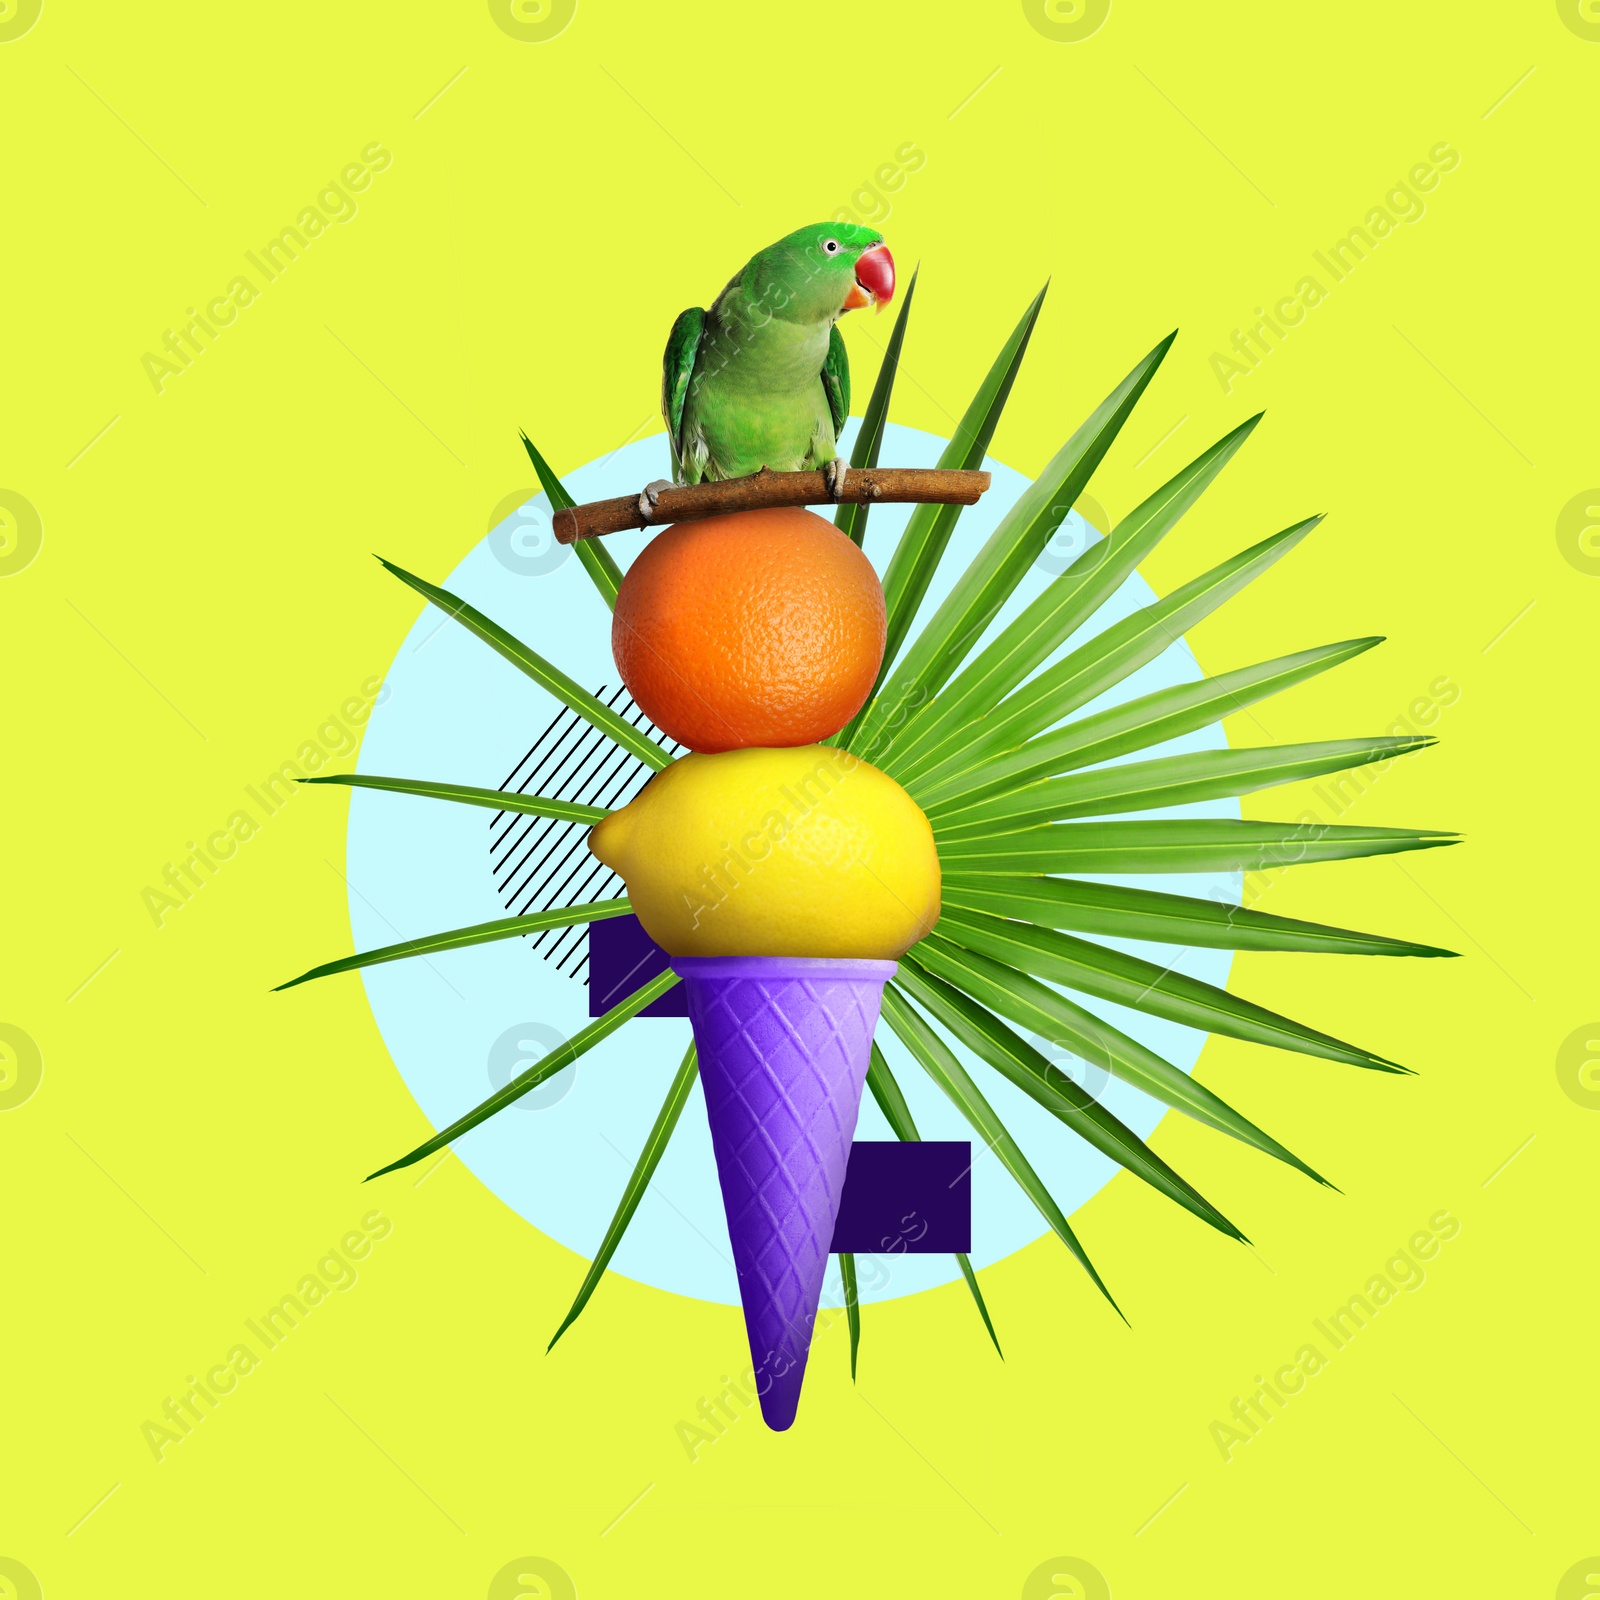 Image of Ice cream cone with lemon, orange and parrot on colorful background. Summer concept. Bright creative design